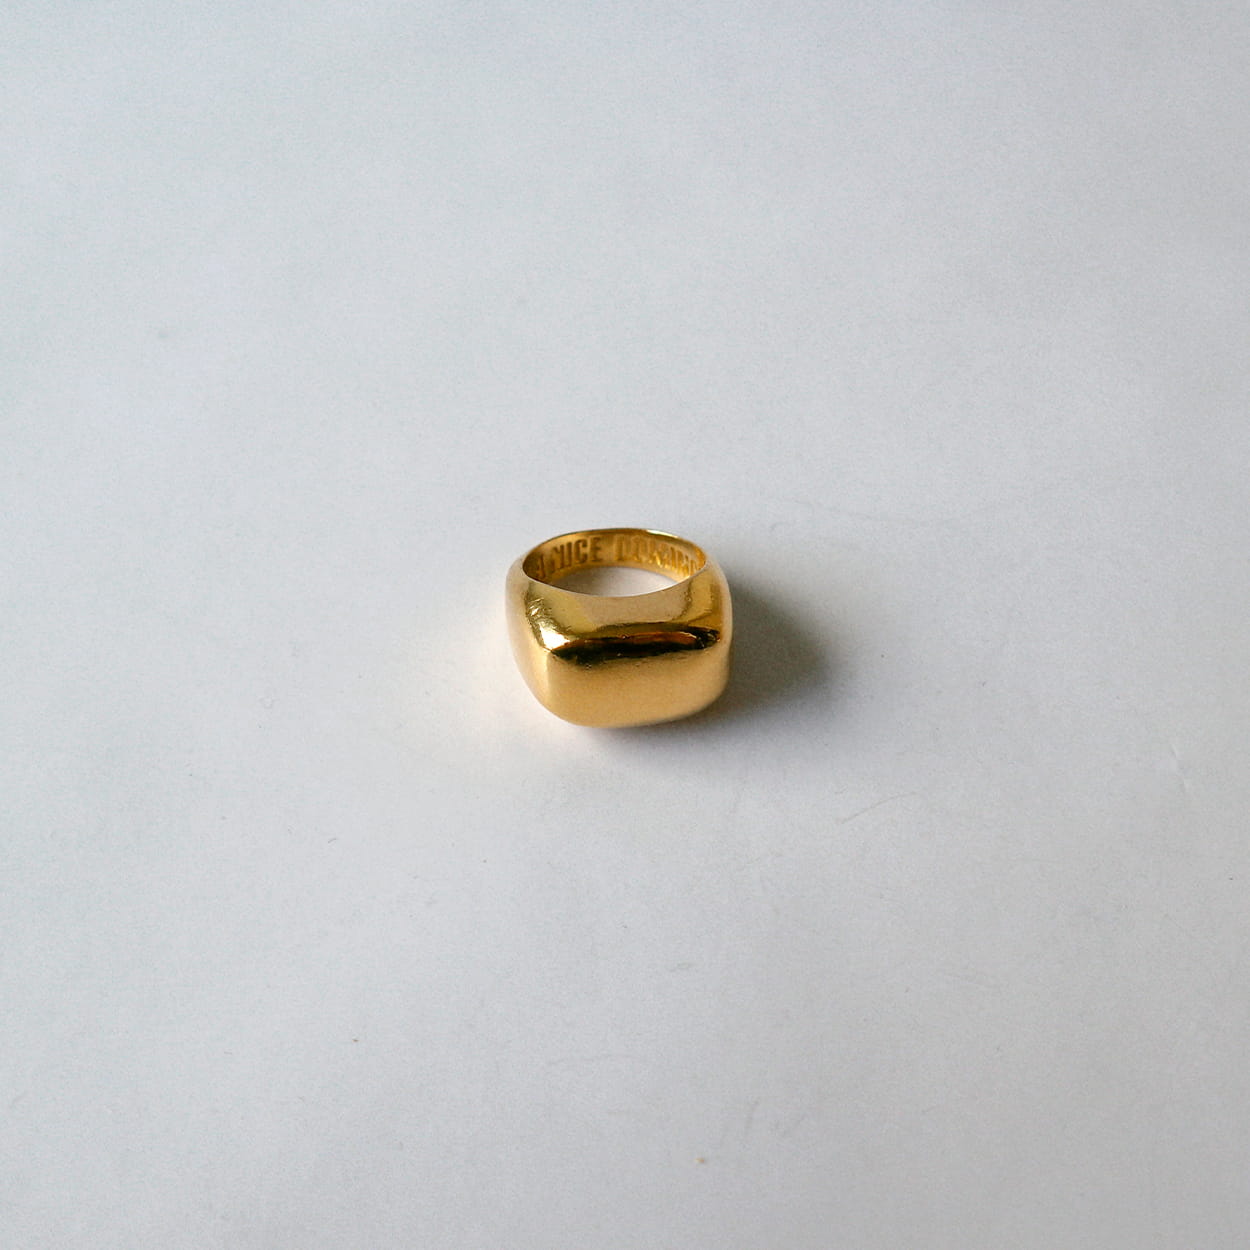 Atelier Domingo's Block gold ring is a tribute to New York block parties. This unisex ring is made in Spain. It is made of a high-quality 24 karat gold plating. All our jewelry is unisex, made for both men and women.